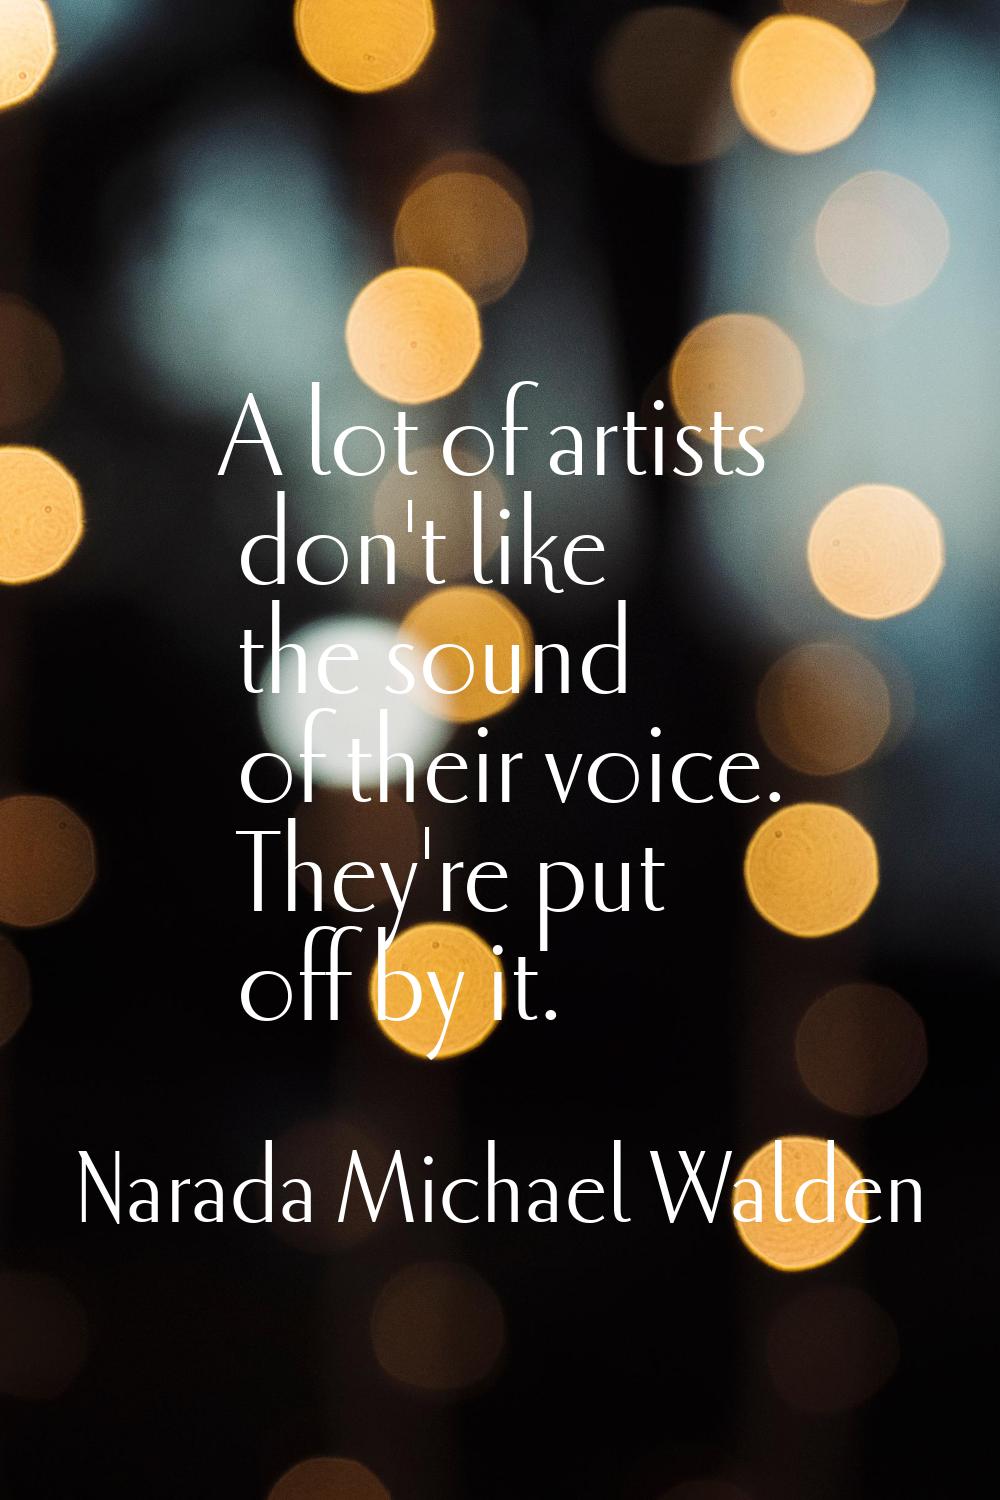 A lot of artists don't like the sound of their voice. They're put off by it.